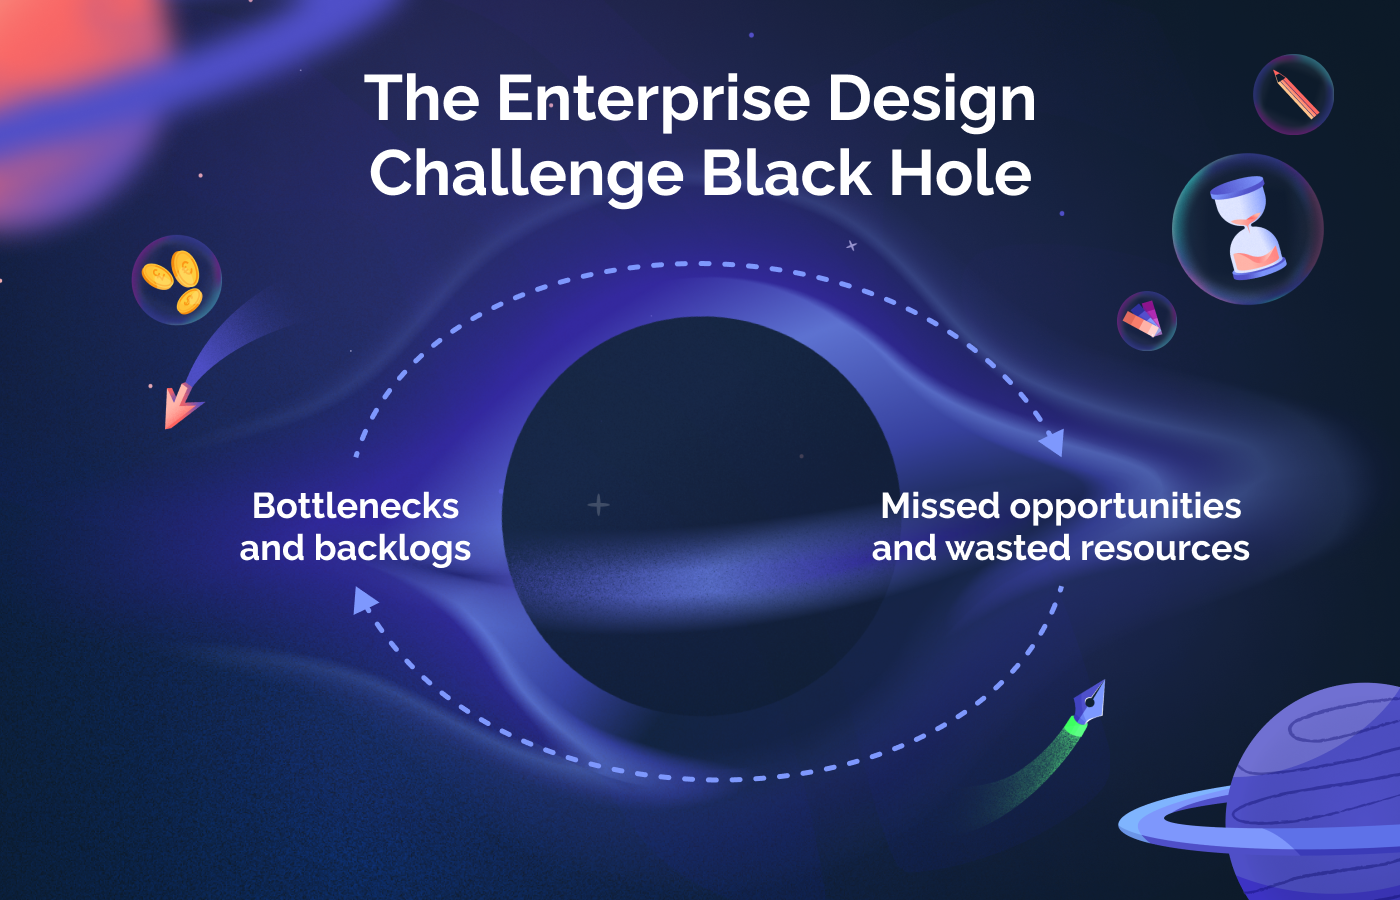 An infographic showing the forces at play in the enterprise design challenge black hole. Bottlenecks and backlogs lead to missed opportunities and wasted resources, which in turn lead to more bottlenecks and backlogs.